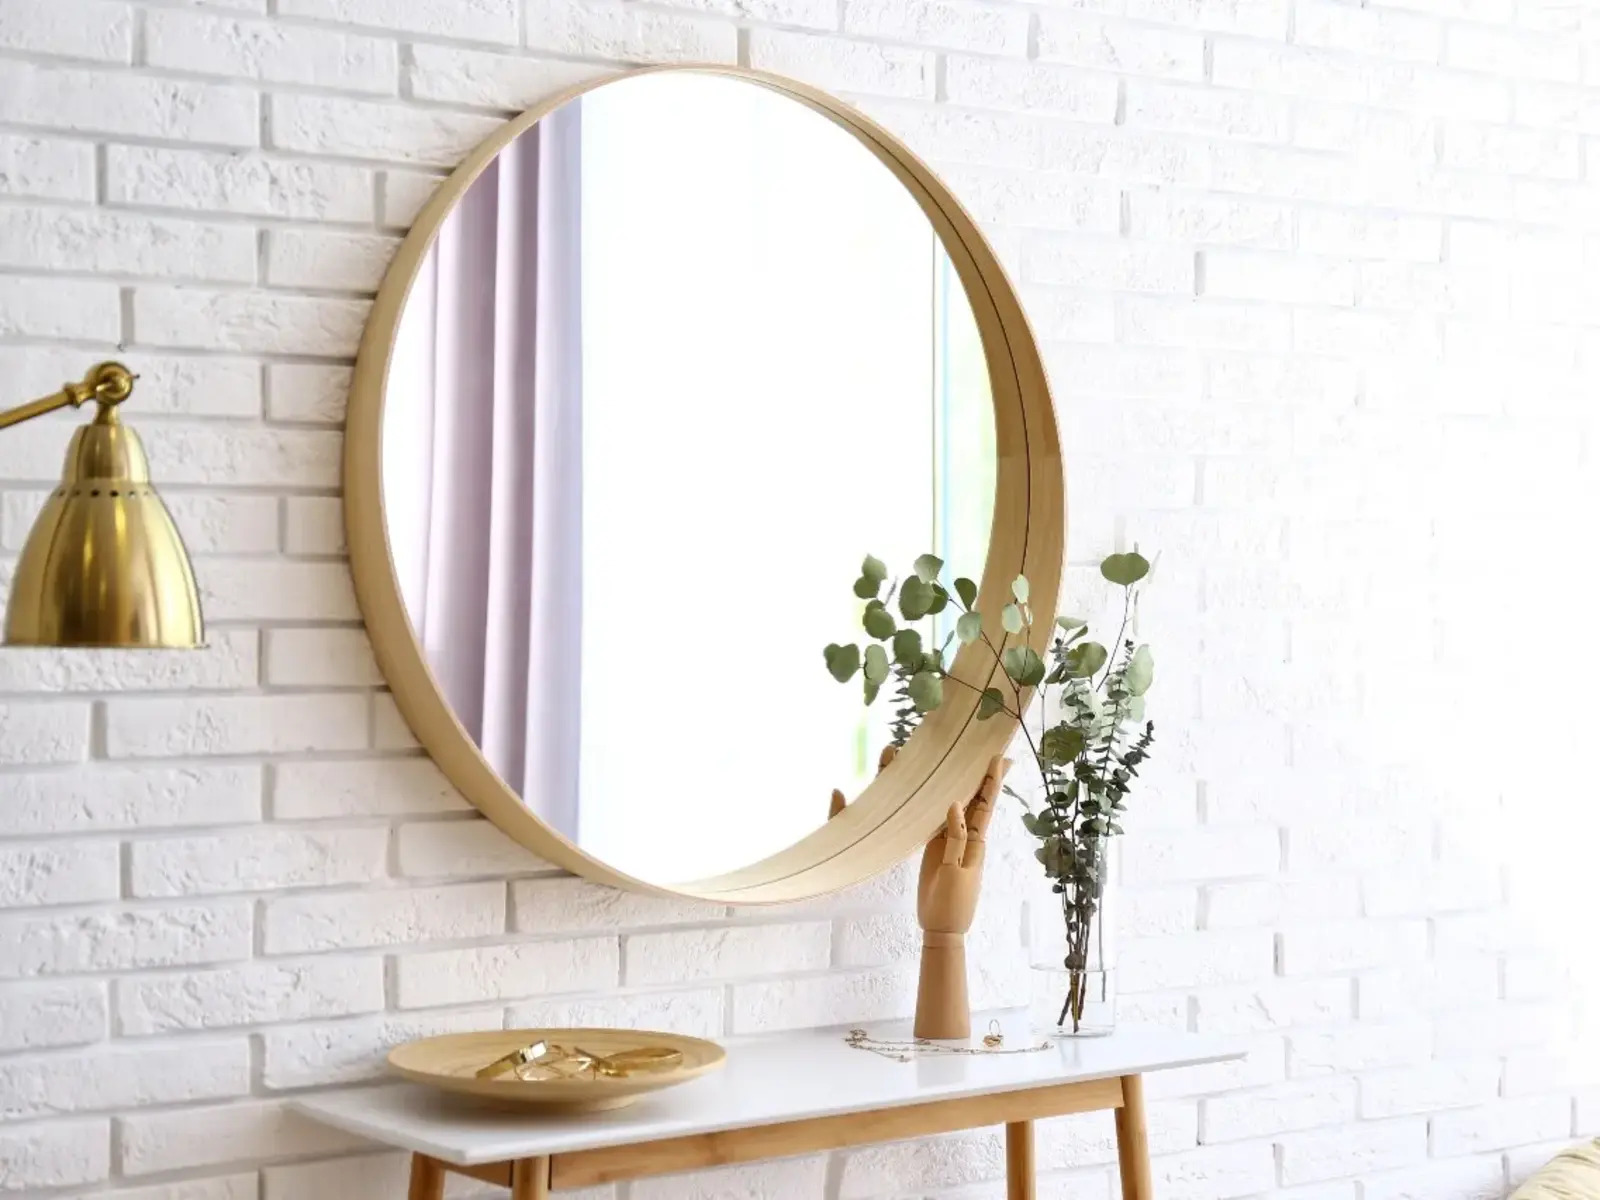 Where To Buy A Mirror